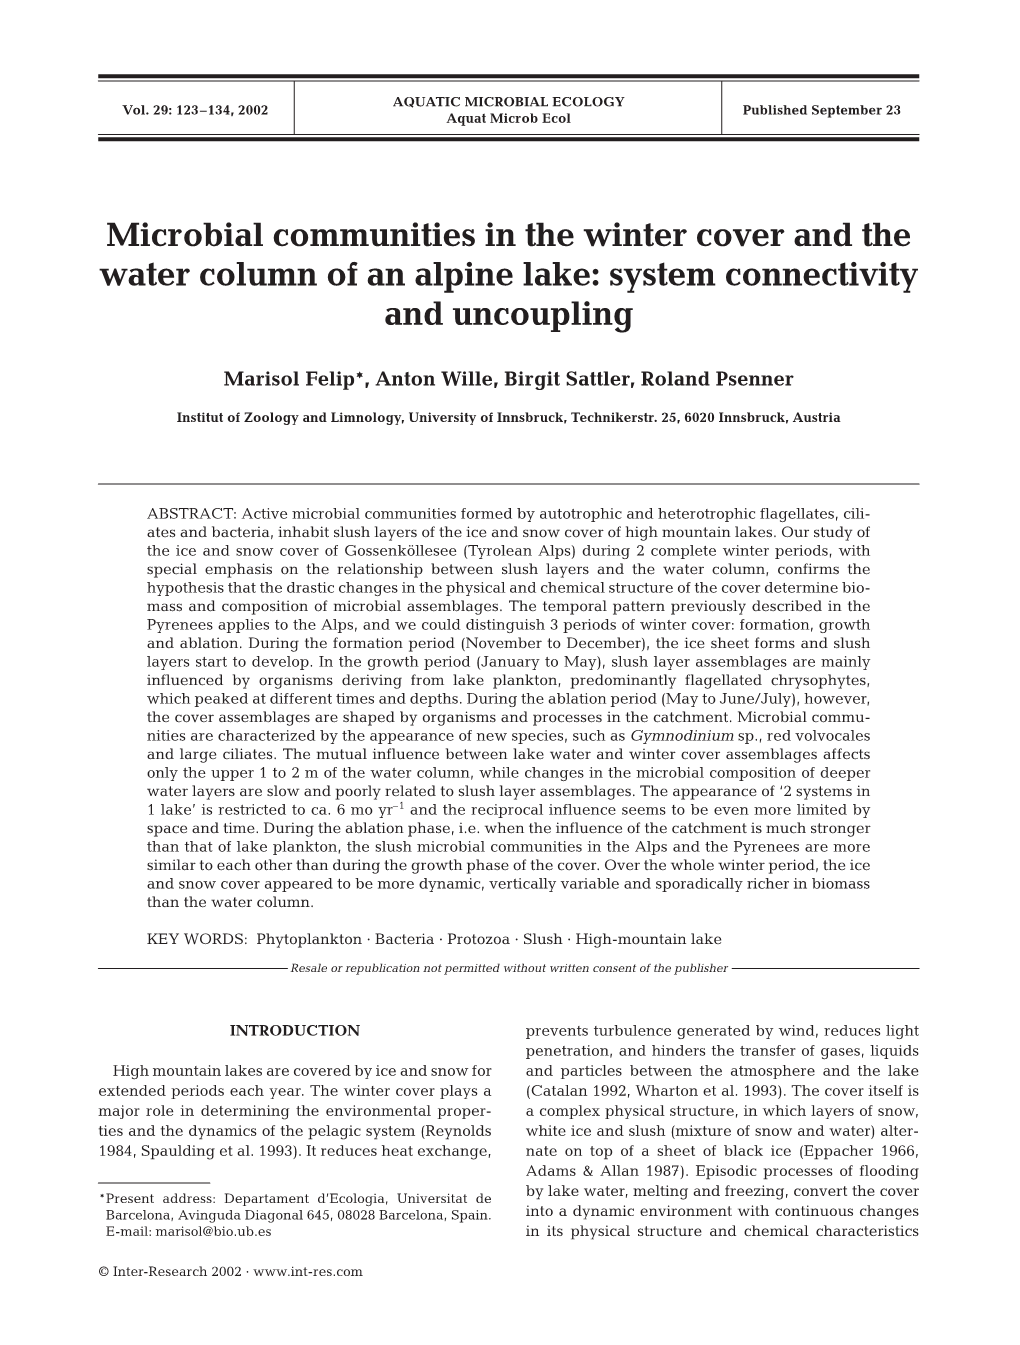 Microbial Communities in the Winter Cover and the Water Column of an Alpine Lake: System Connectivity and Uncoupling